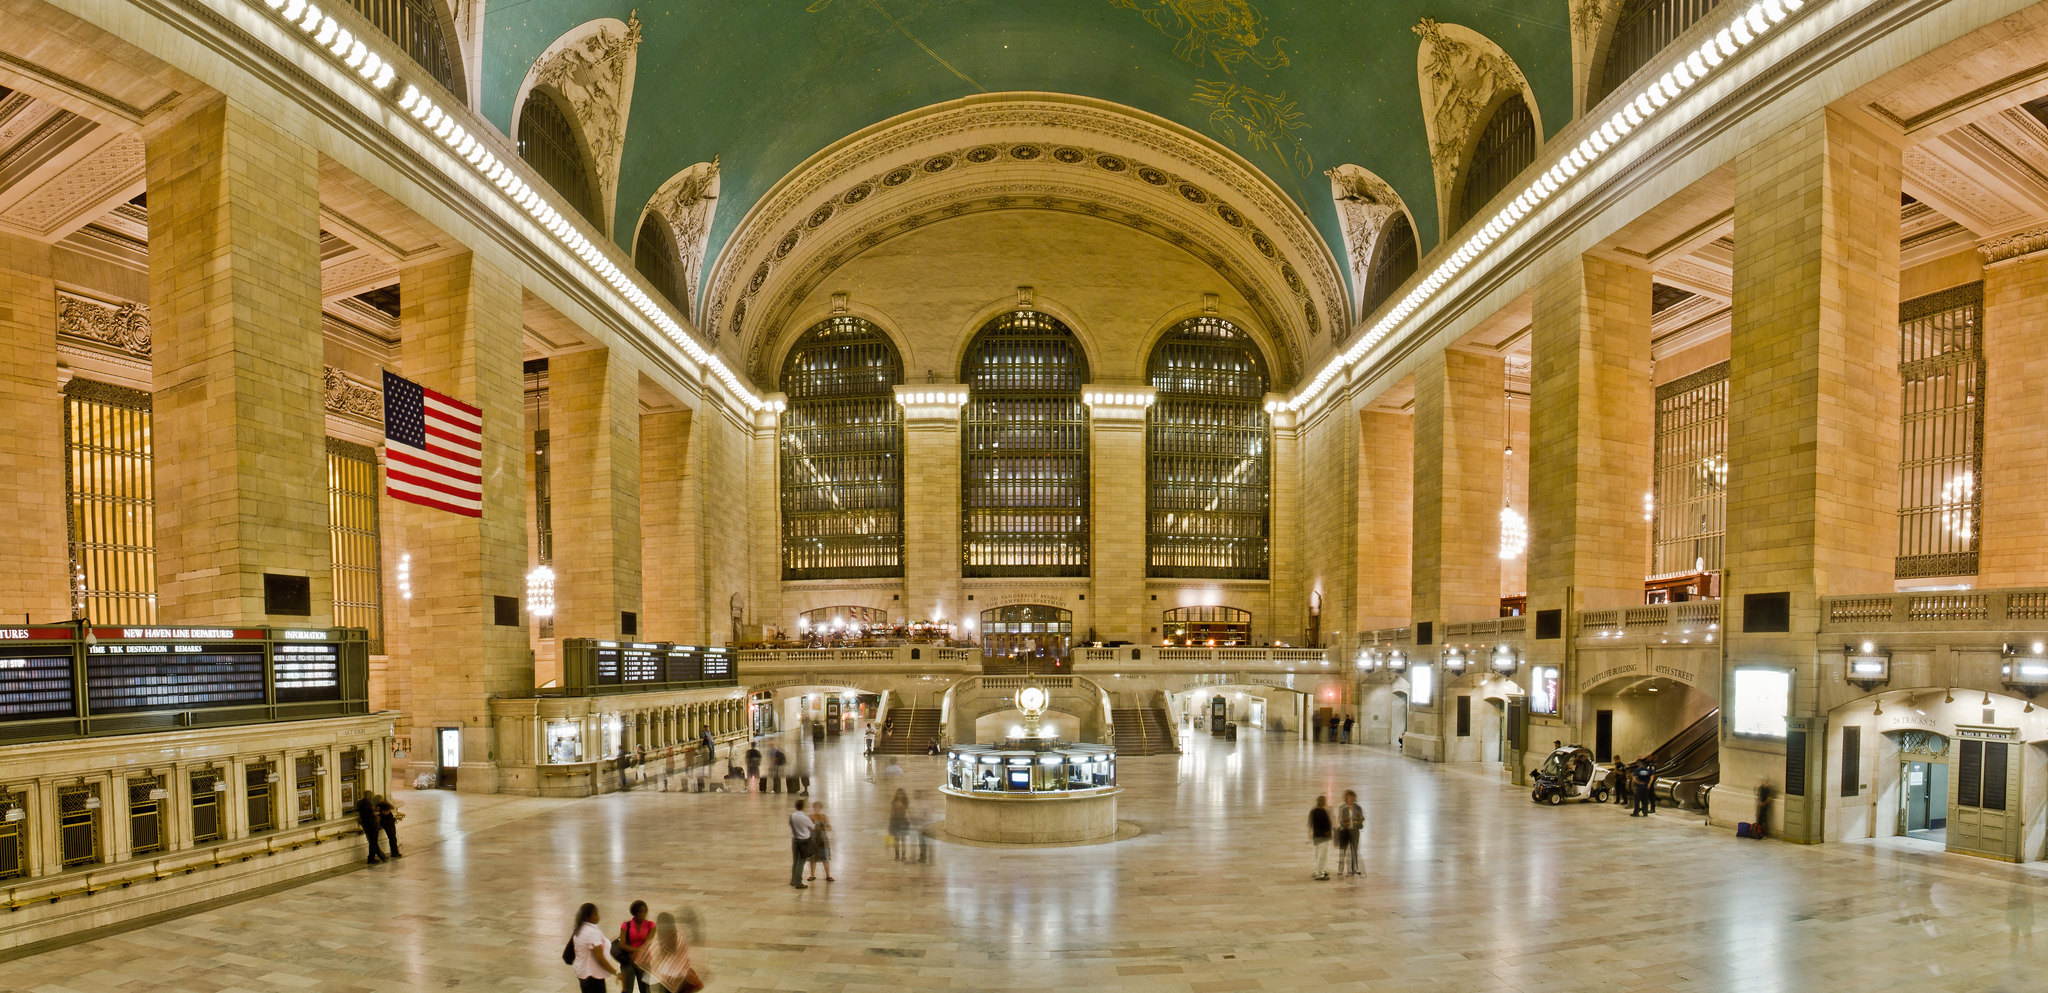 <p>New York Grand Central Station is one the city’s busiest landmarks, with thousands of New Yorkers passing through daily.</p><p>Aside from its rich history and stunning architectural design, it stands as a tourist attraction because it also has an enormous variety of shops and restaurants.</p><p><strong>Features:</strong> Concourse Ceiling, Booth Clock, Whispering Gallery, Park Avenue Viaduct, Vanderbilt Tennis Club, Grand Central Market, shops, restaurants, cafes, and more.</p><p>Asim Bharwani, Flickr</p>